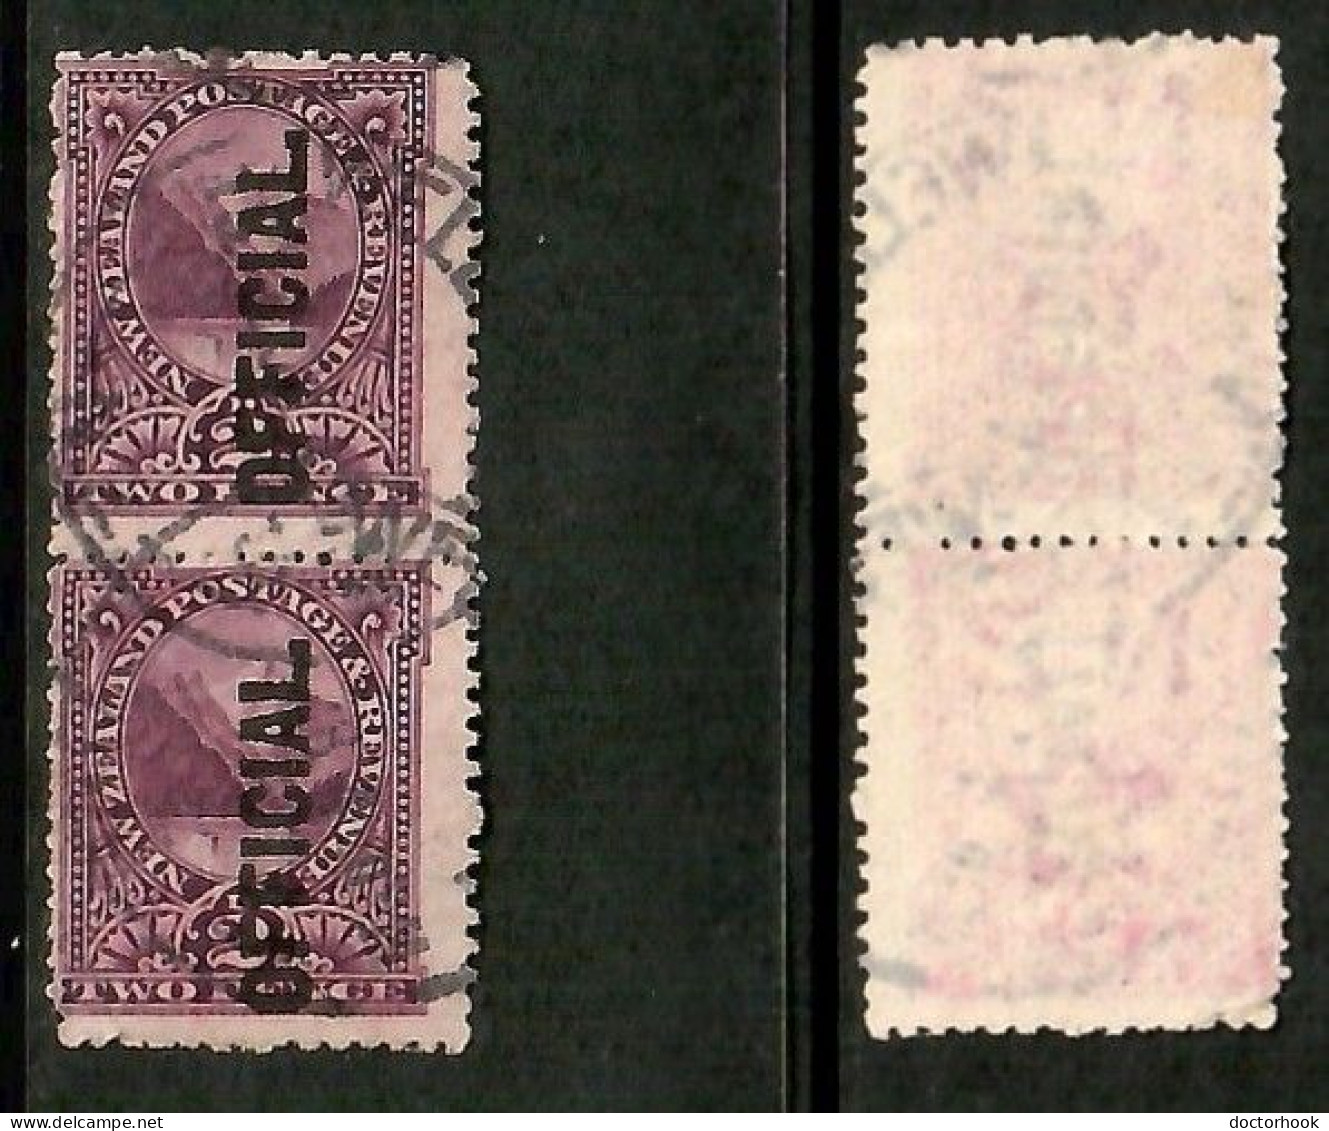 NEW ZEALAND    Scott # O 26 USED PAIR (CONDITION PER SCAN) (Stamp Scan # 1042-5) - Service